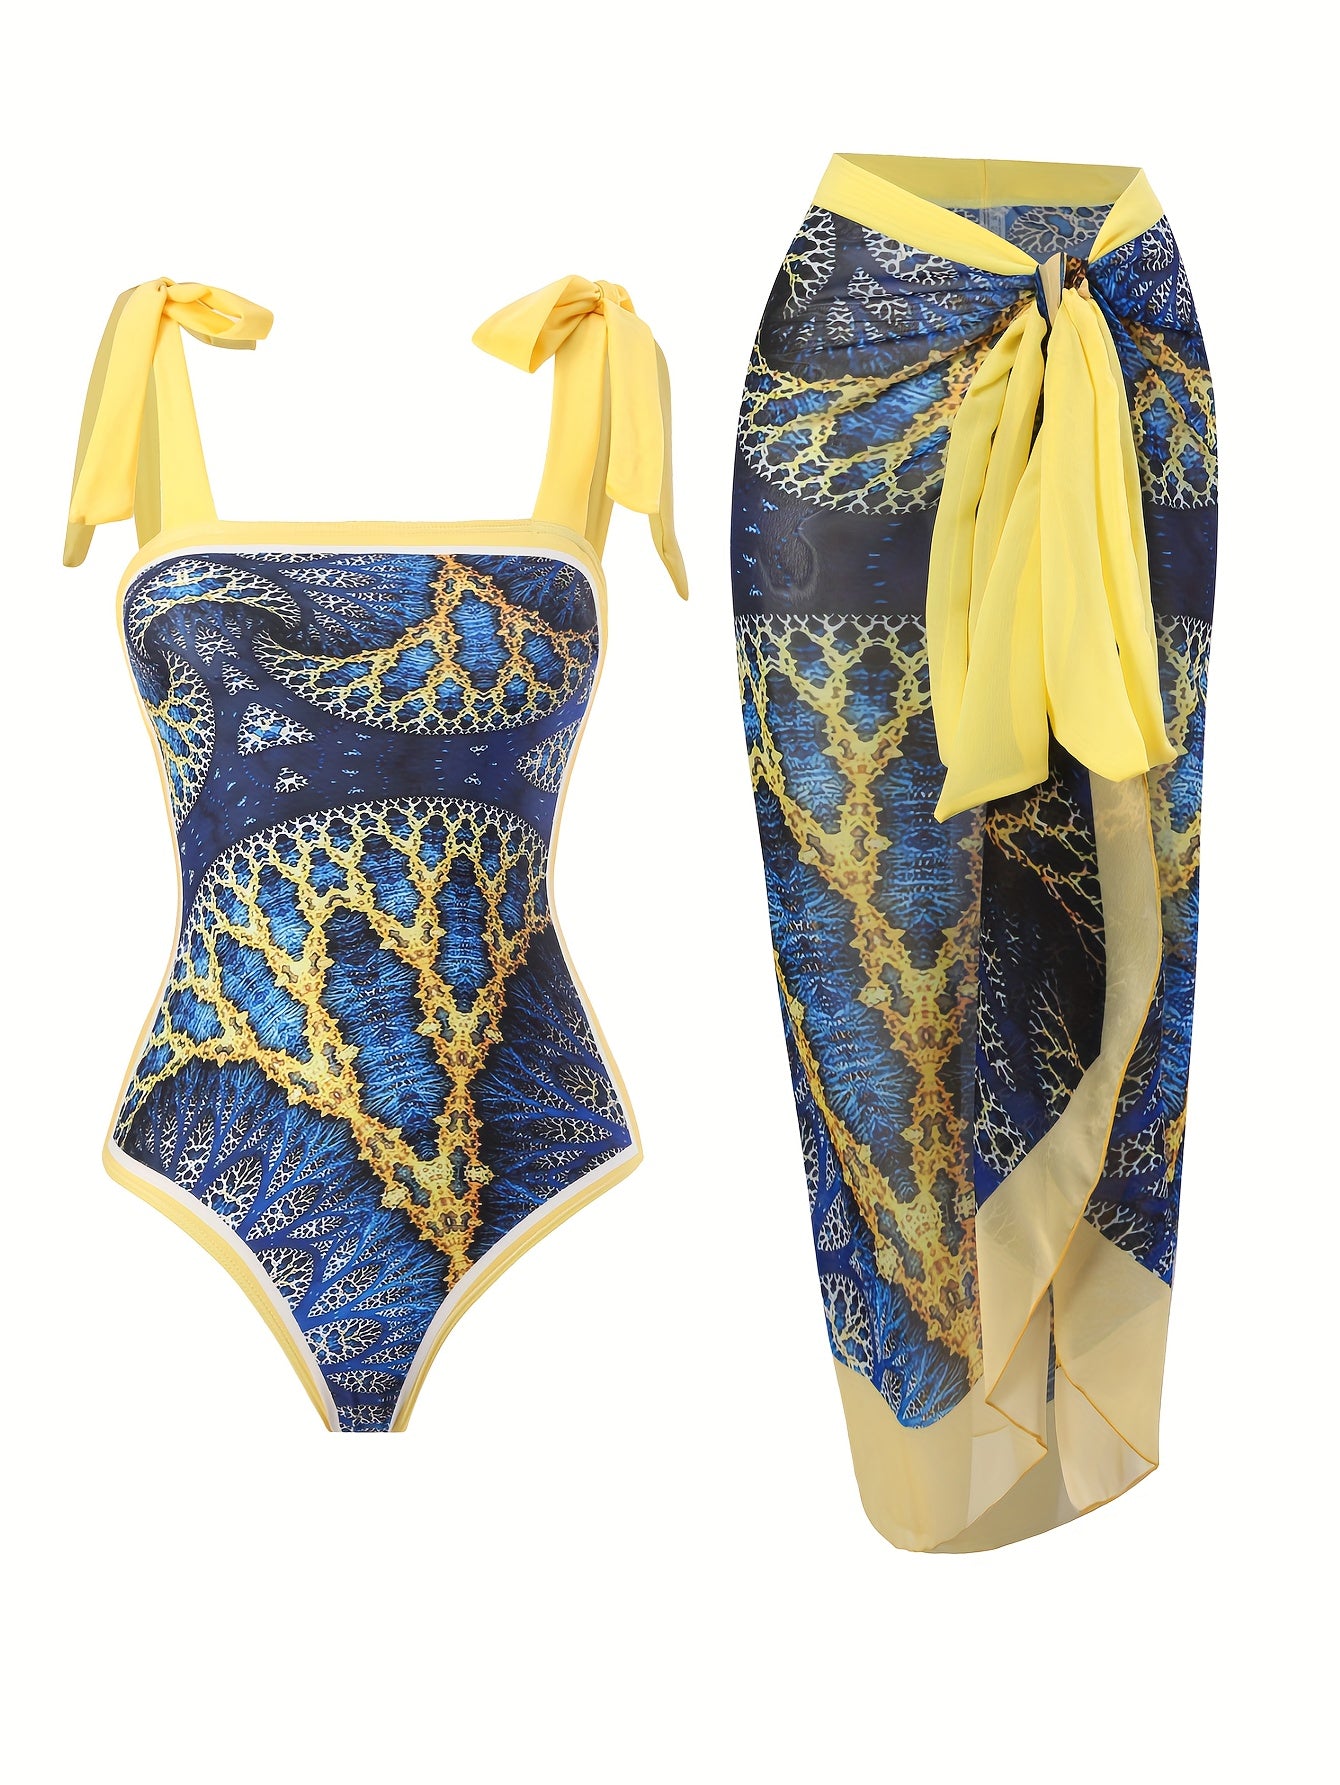 Women's Two-Piece  Swimsuit with Cover-Up, Sporlike Design, Tropical Print, Tummy Control, and Trendy monokini Bathing Suit